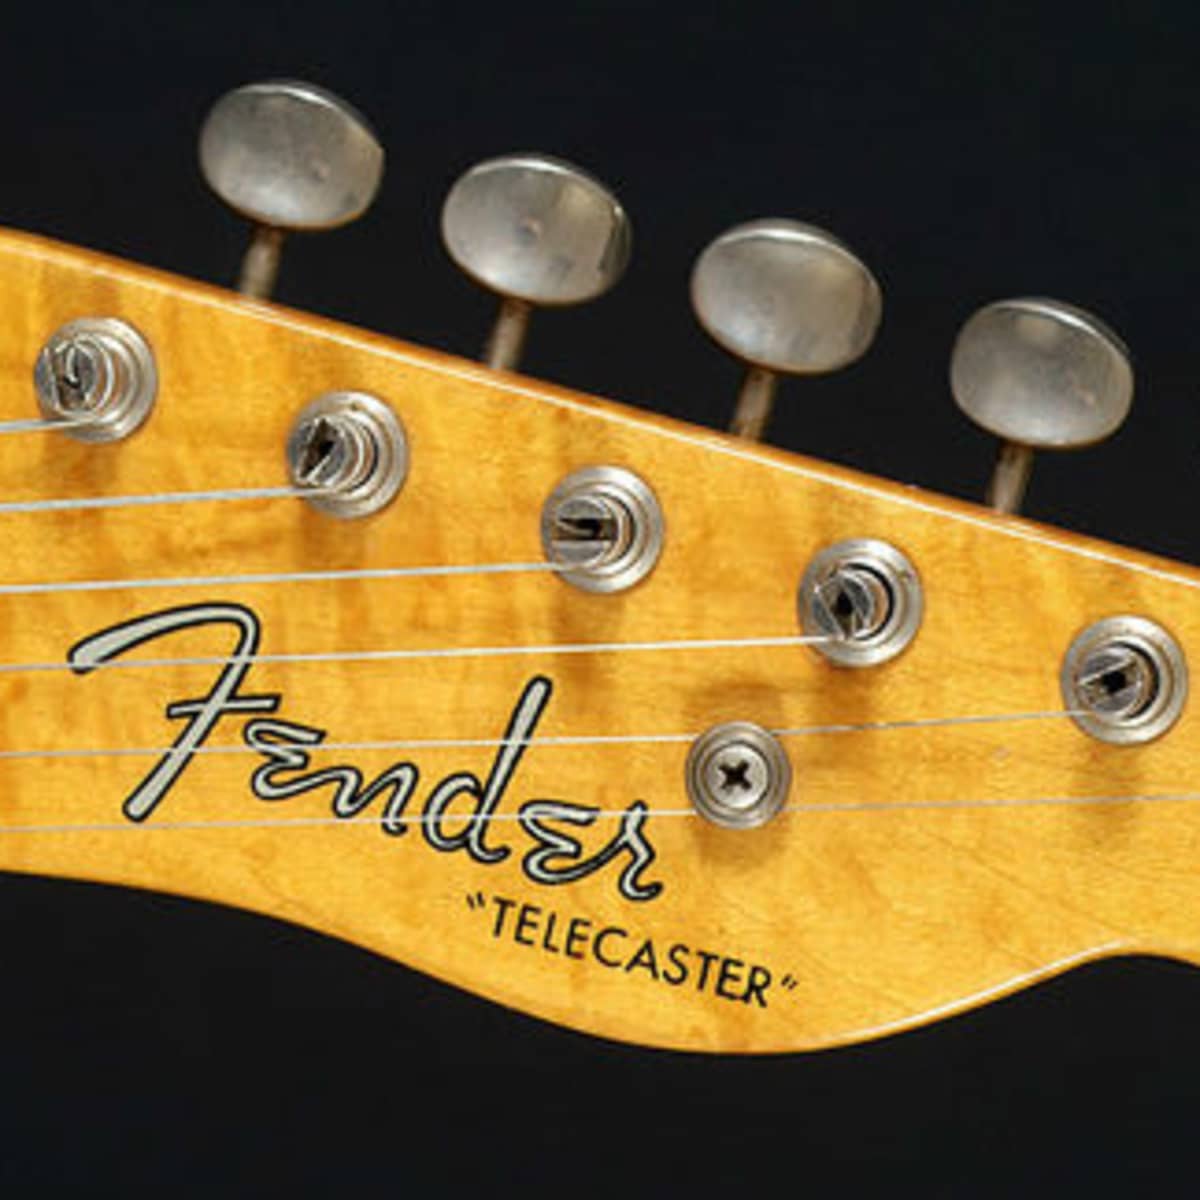 The Fender Telecaster: Country Twang to Indie Rock, is the